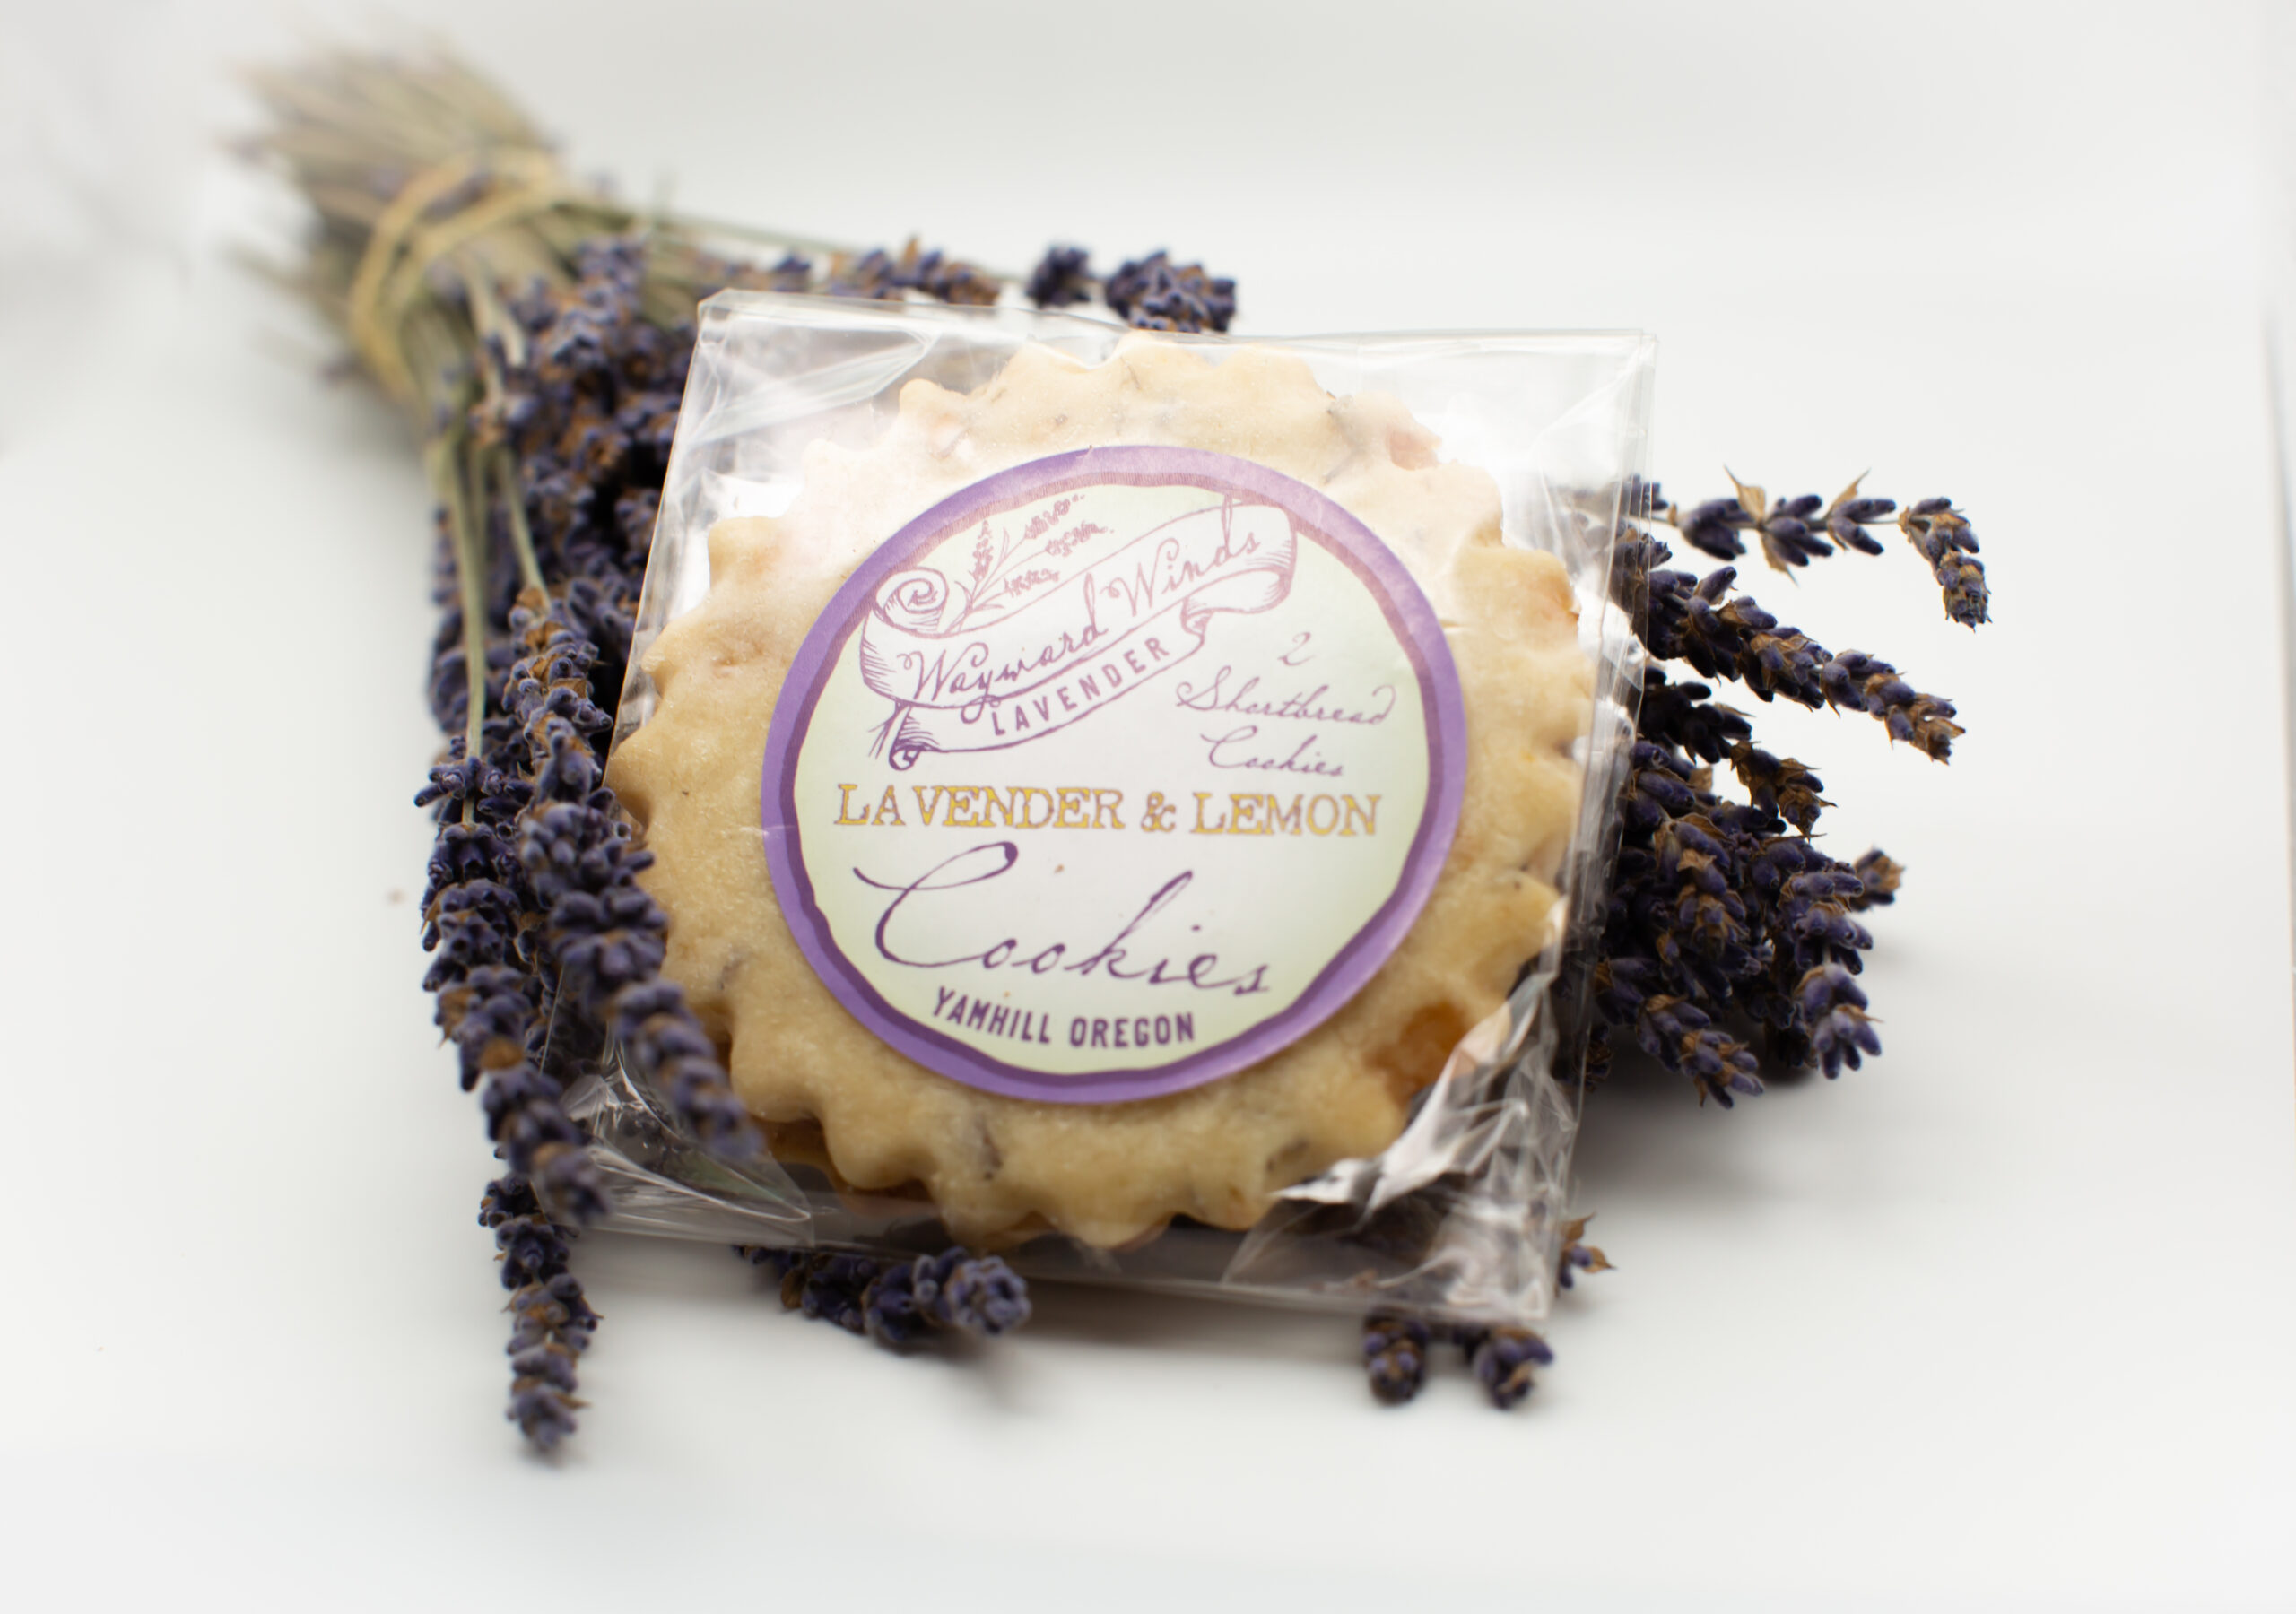 Cookies and care-taking at the lavender shop